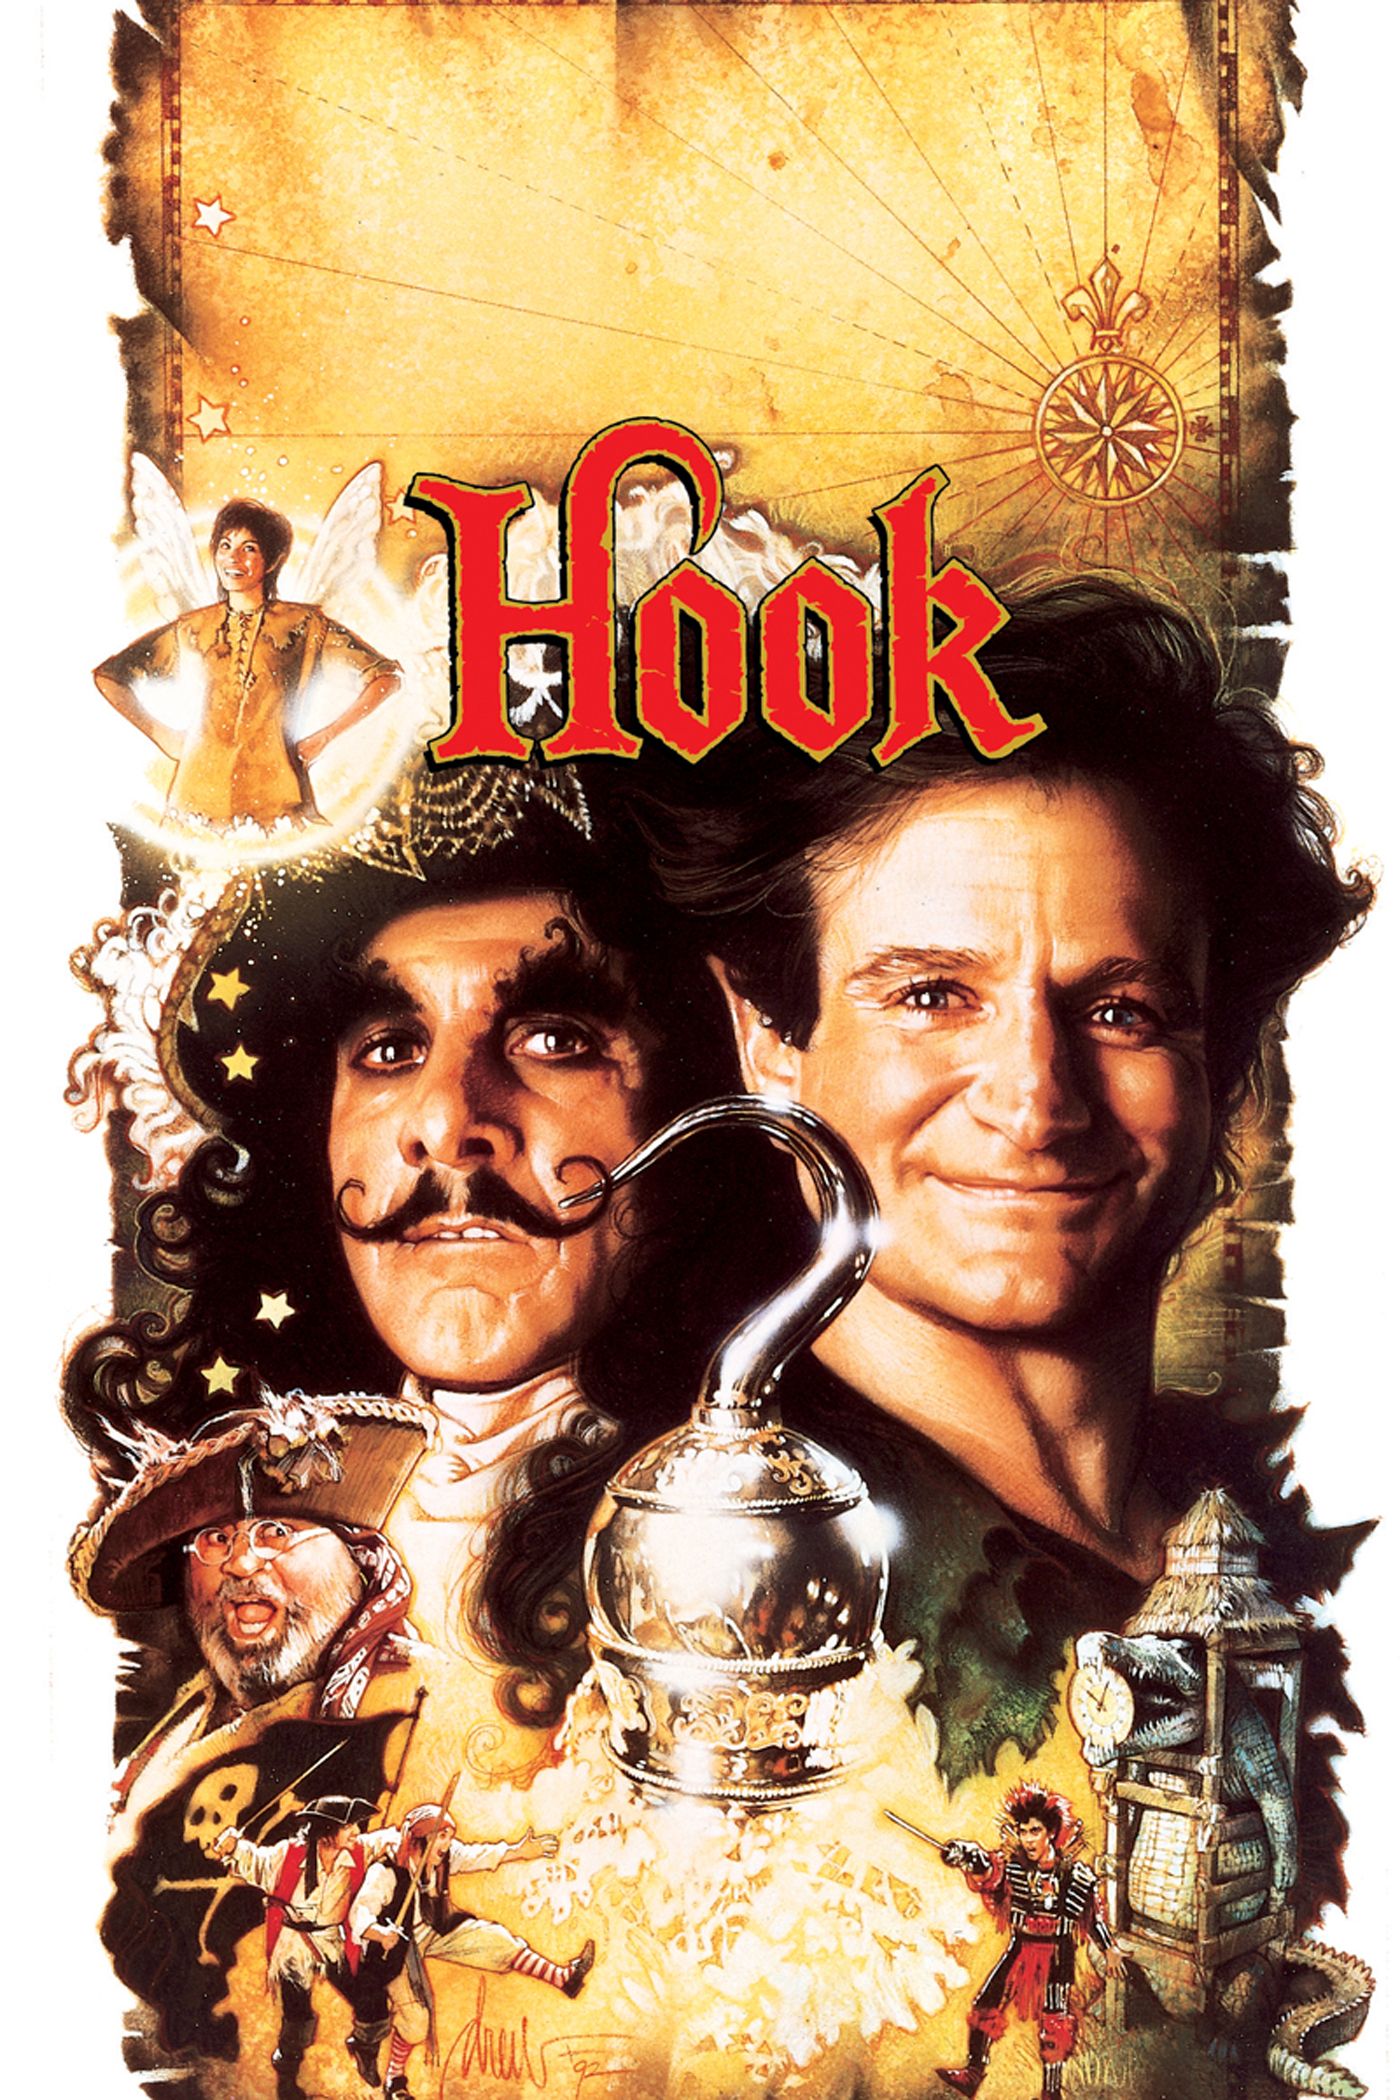 carol a reynolds recommends hook full movie dailymotion pic